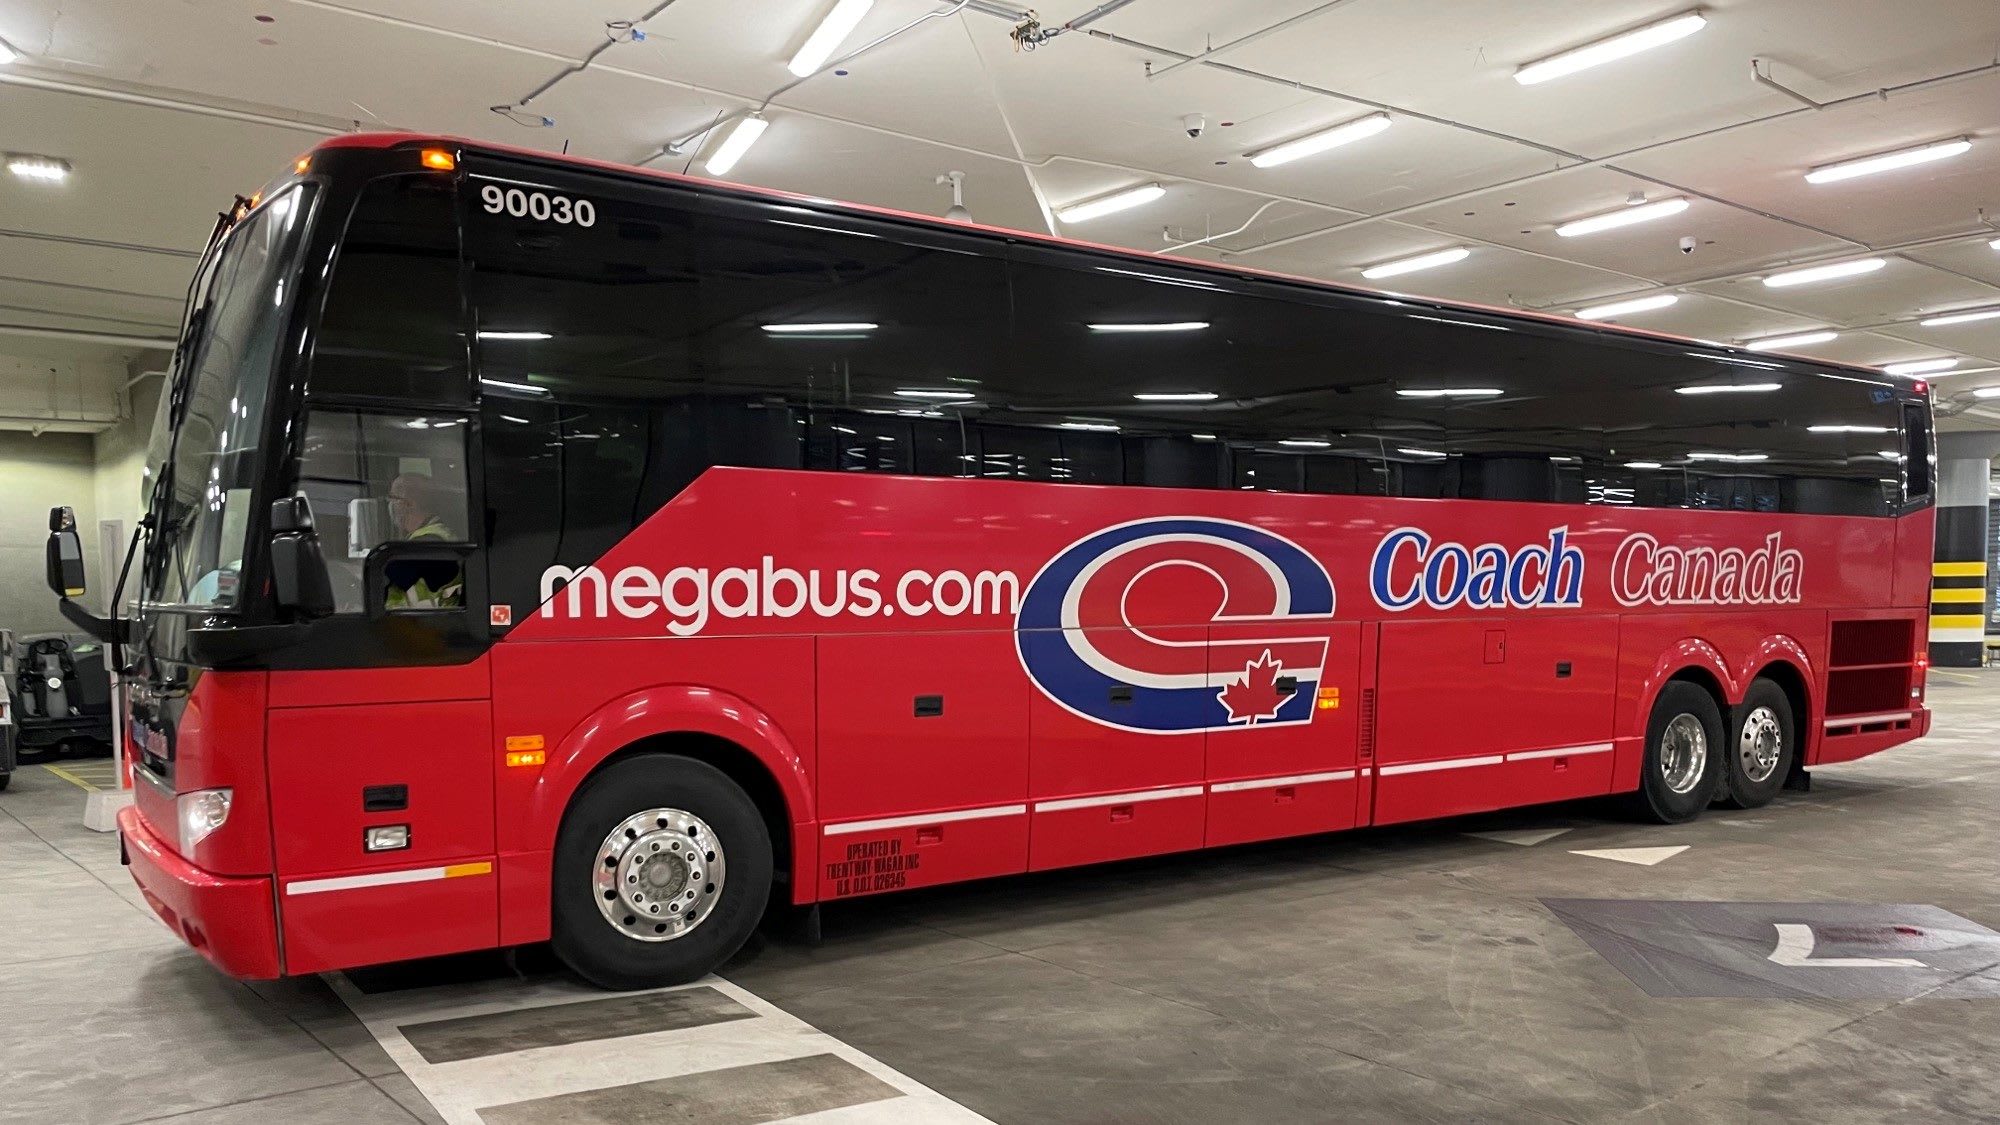 Megabus starts to roll into new Union Station Bus Terminal